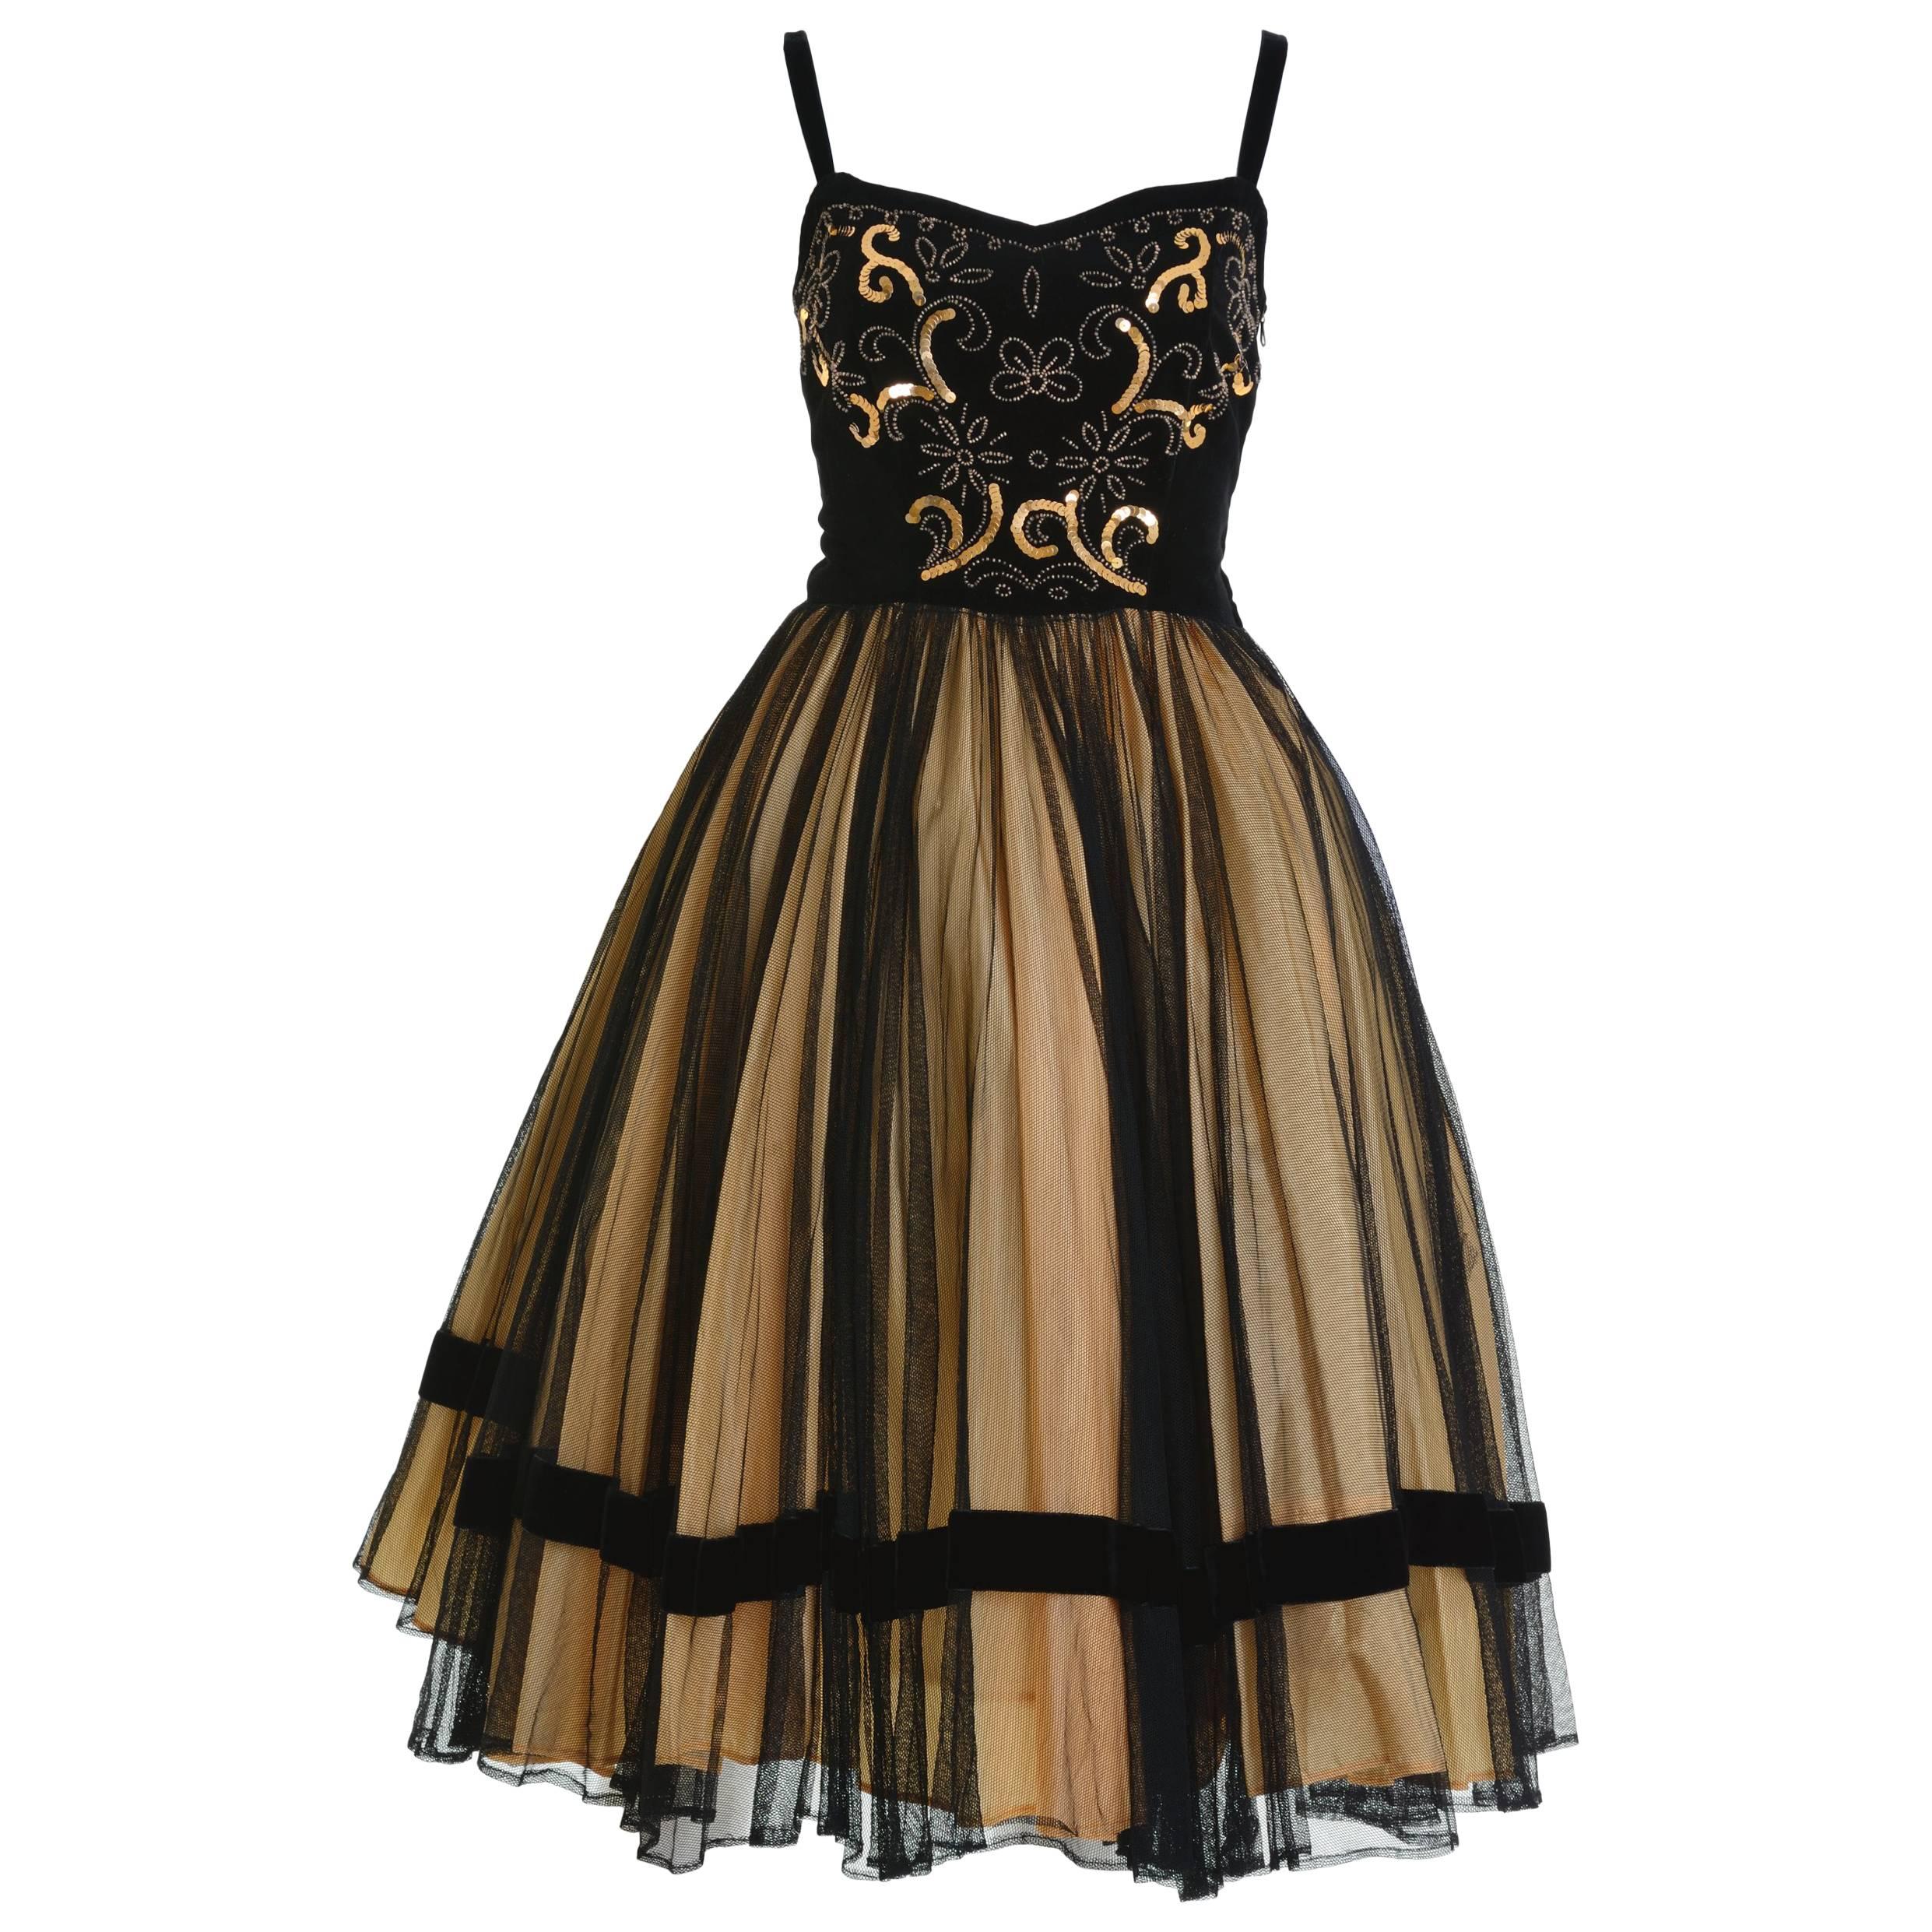 1950s Vintage Black and Gold Embroidered Cocktail Dress